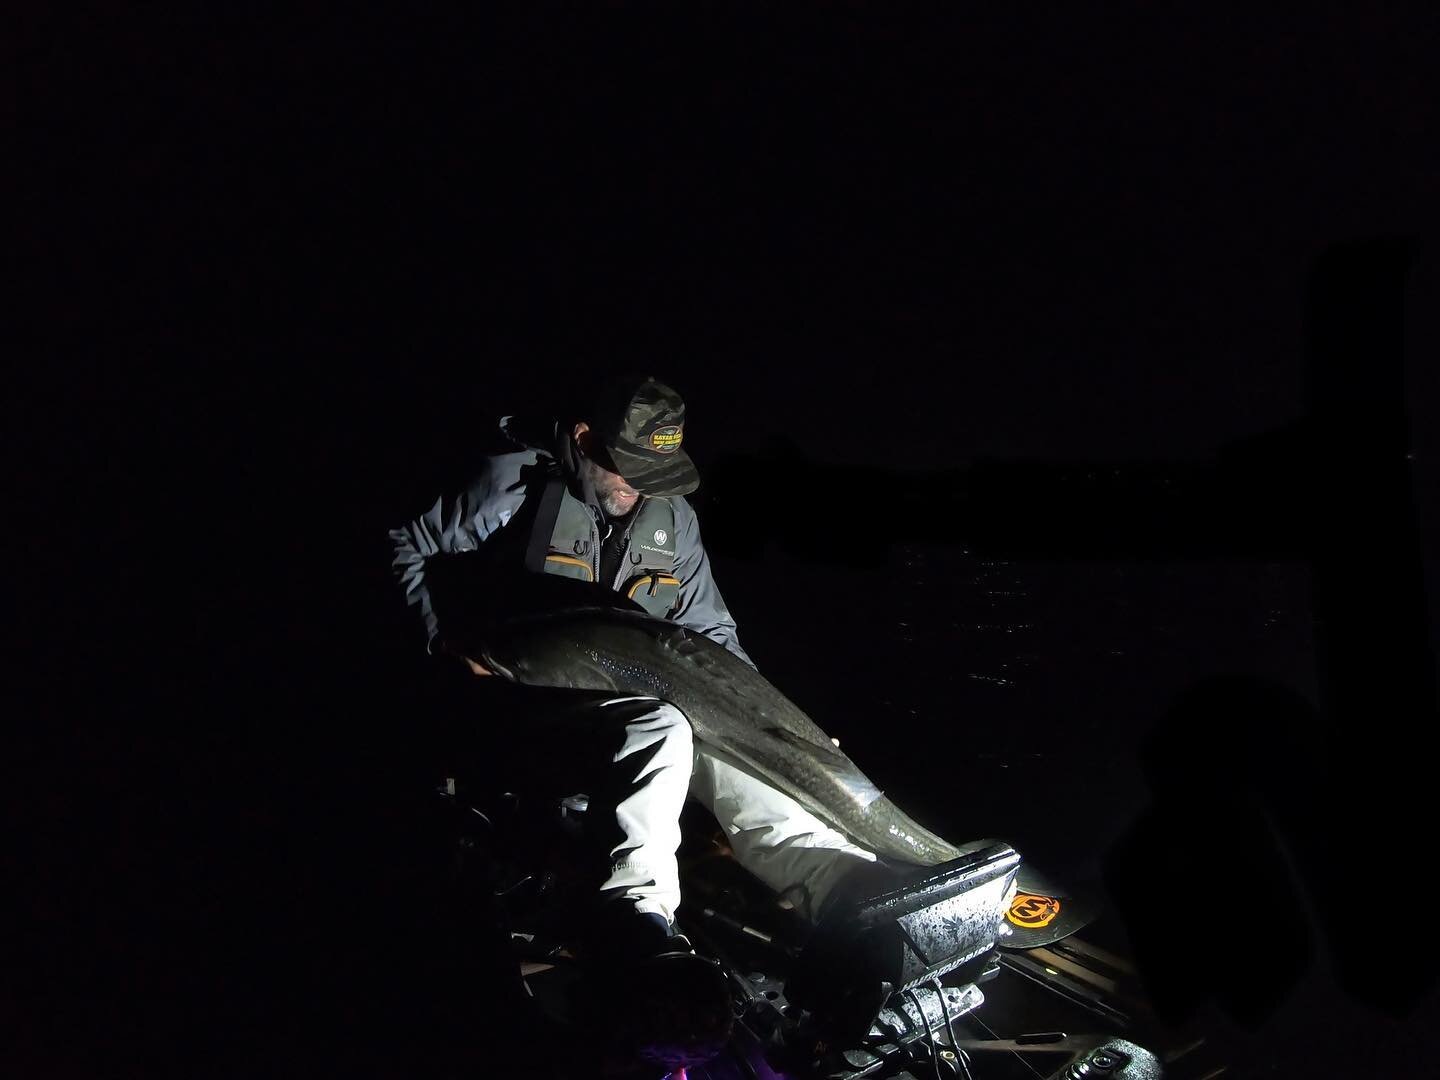 🚂 All aboard &hellip;&hellip;. Two nights in a row LFG!  If you want a opportunity you will never forget contact me and let&rsquo;s make this happen!  #maineguide #kayakfishnewenglandguideservice #gravitytackle #torqeedofishing #simmsfishing #wildyf